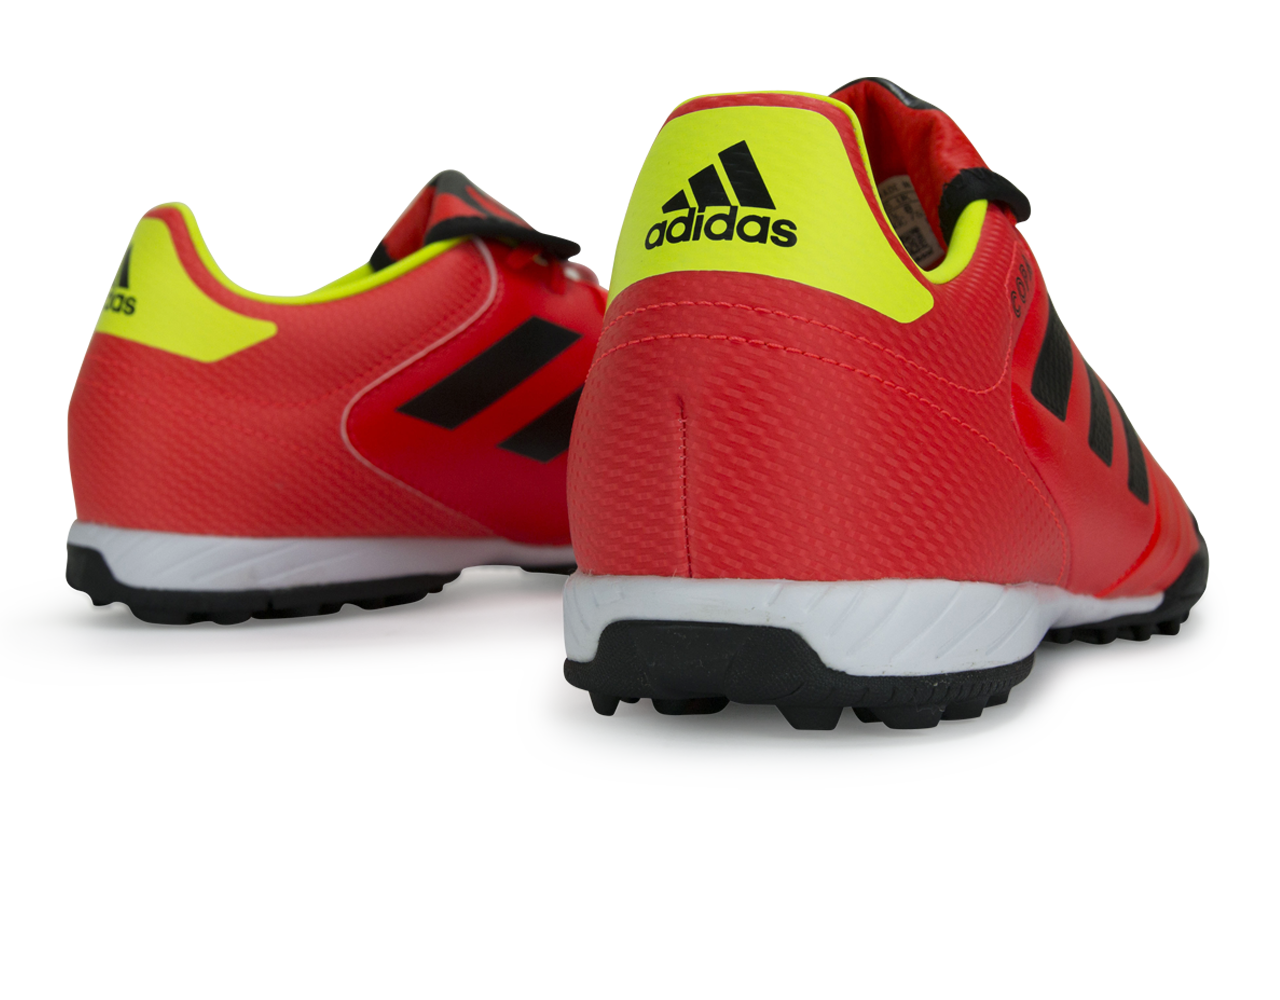 adidas Men's Copa 18.3 Turf Soccer Shoes Solar Red/Core Black